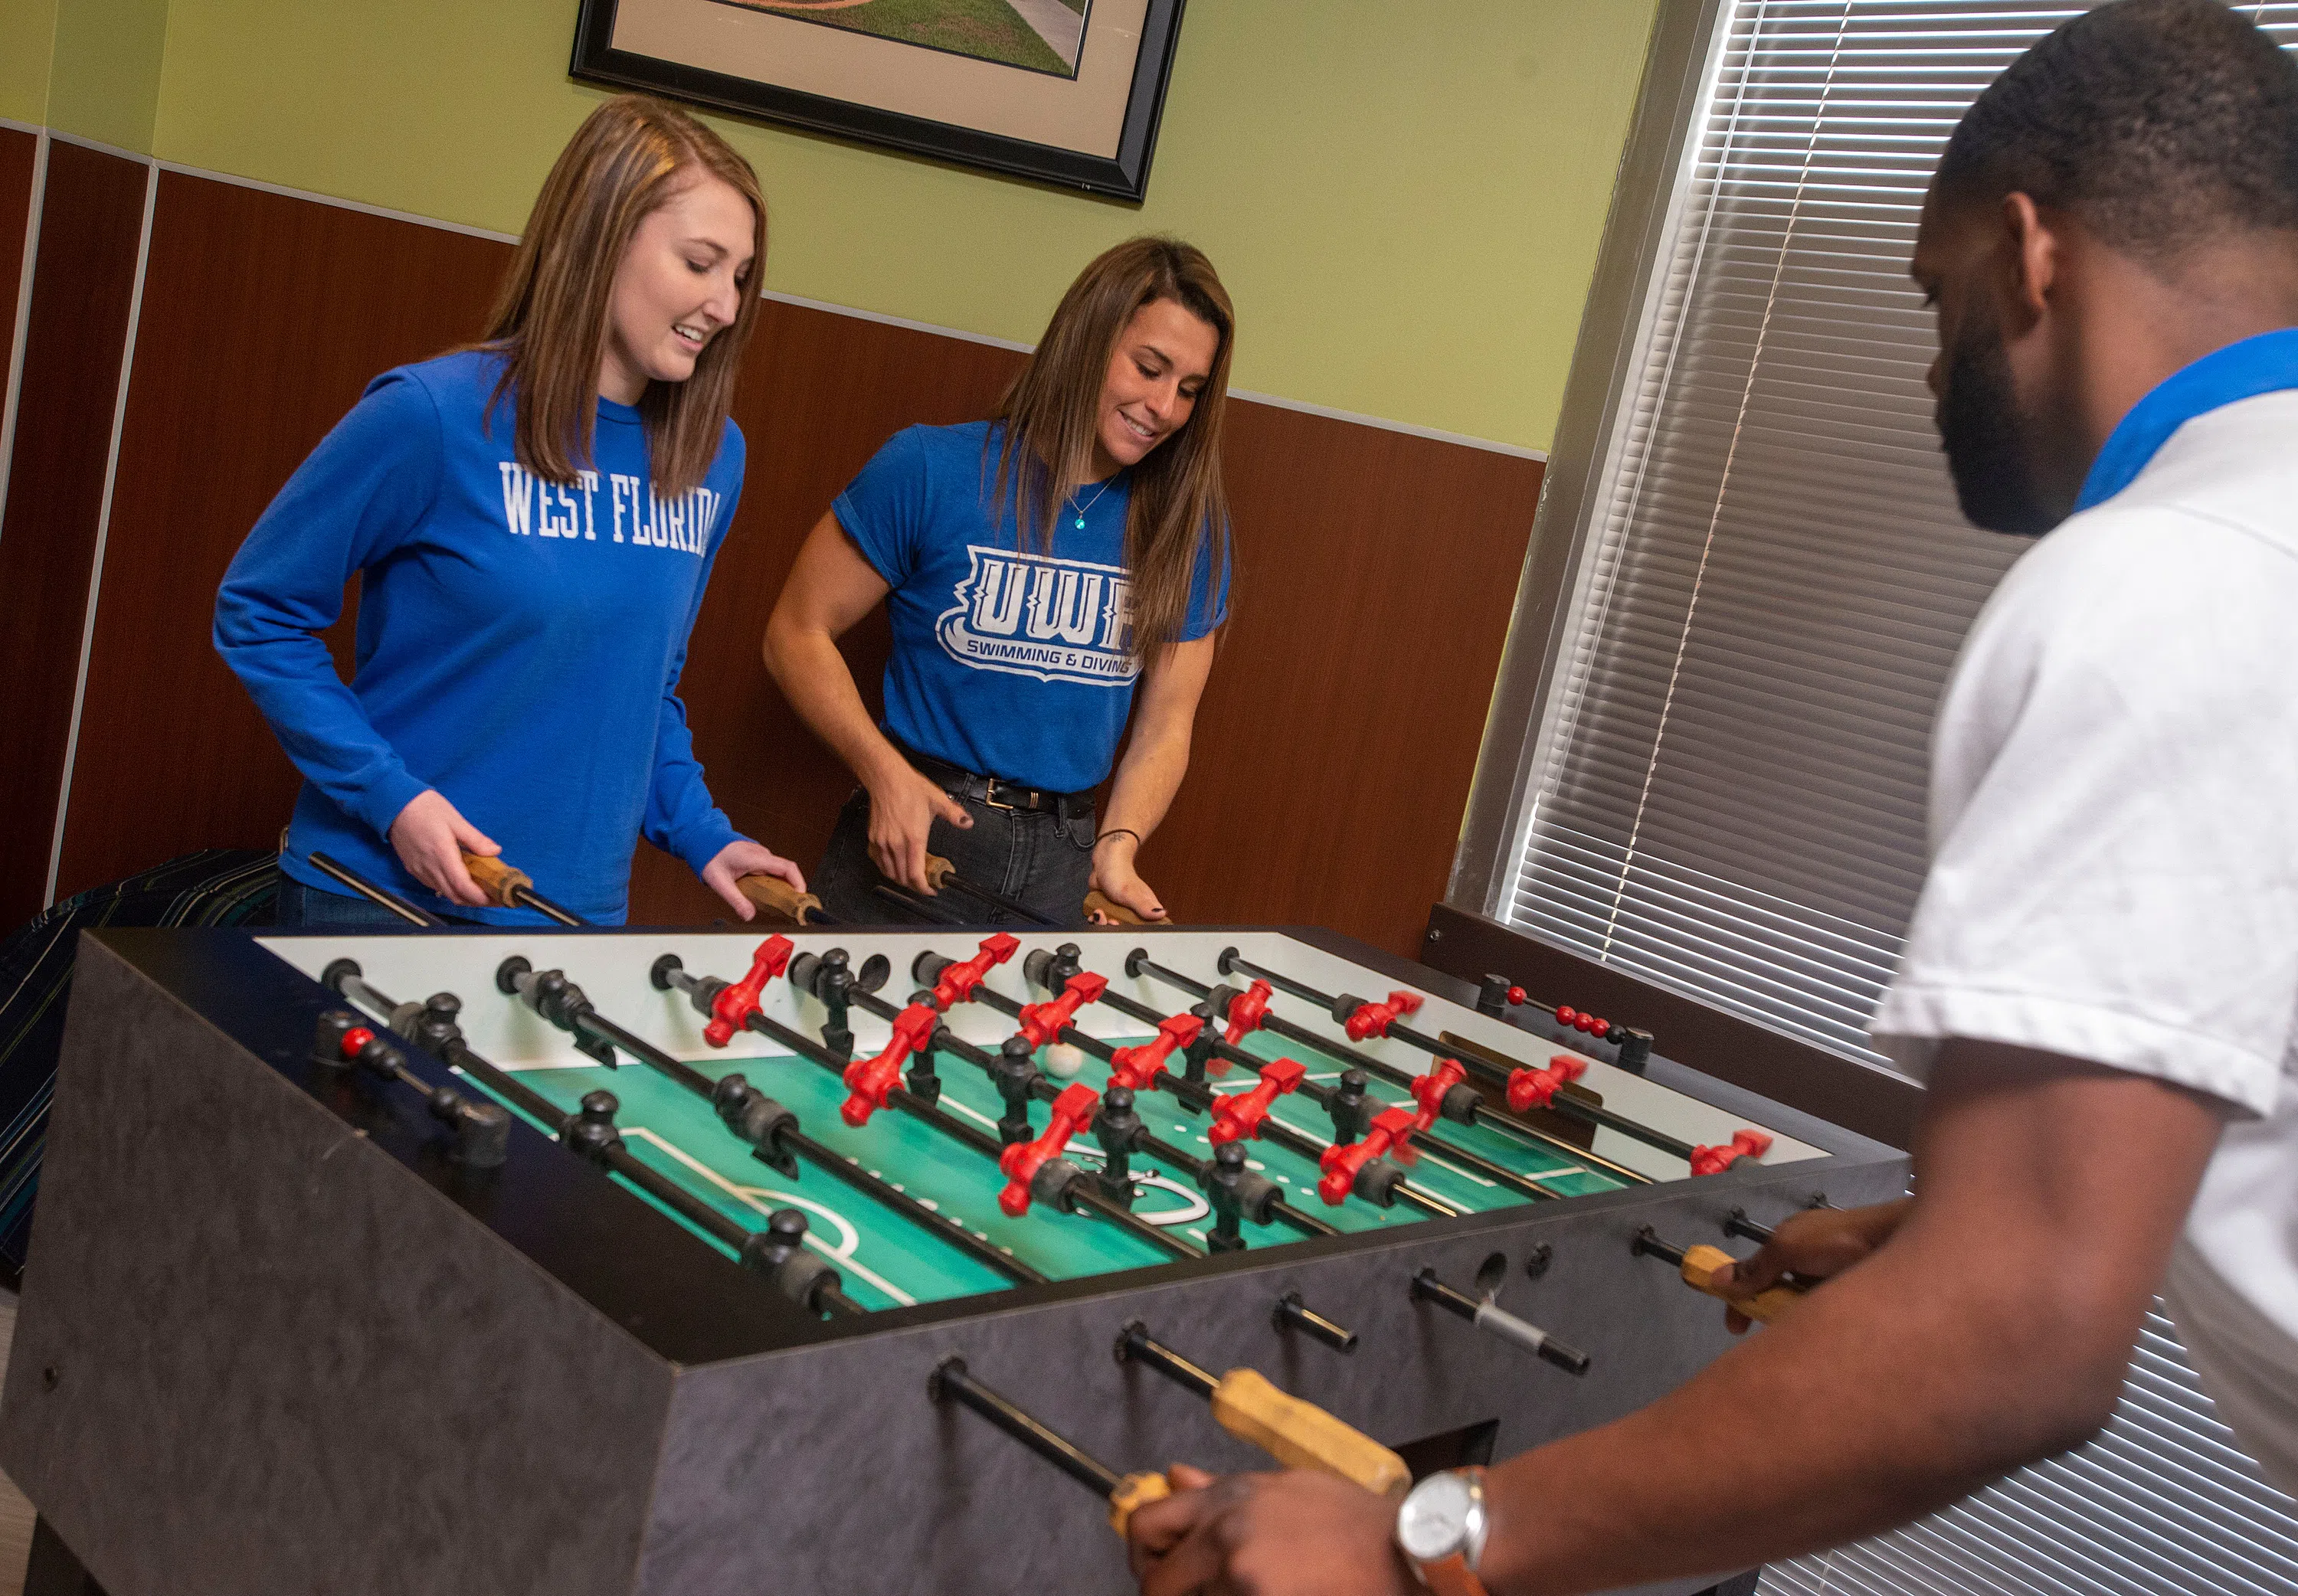 Students playing foosball in the Argo Galley